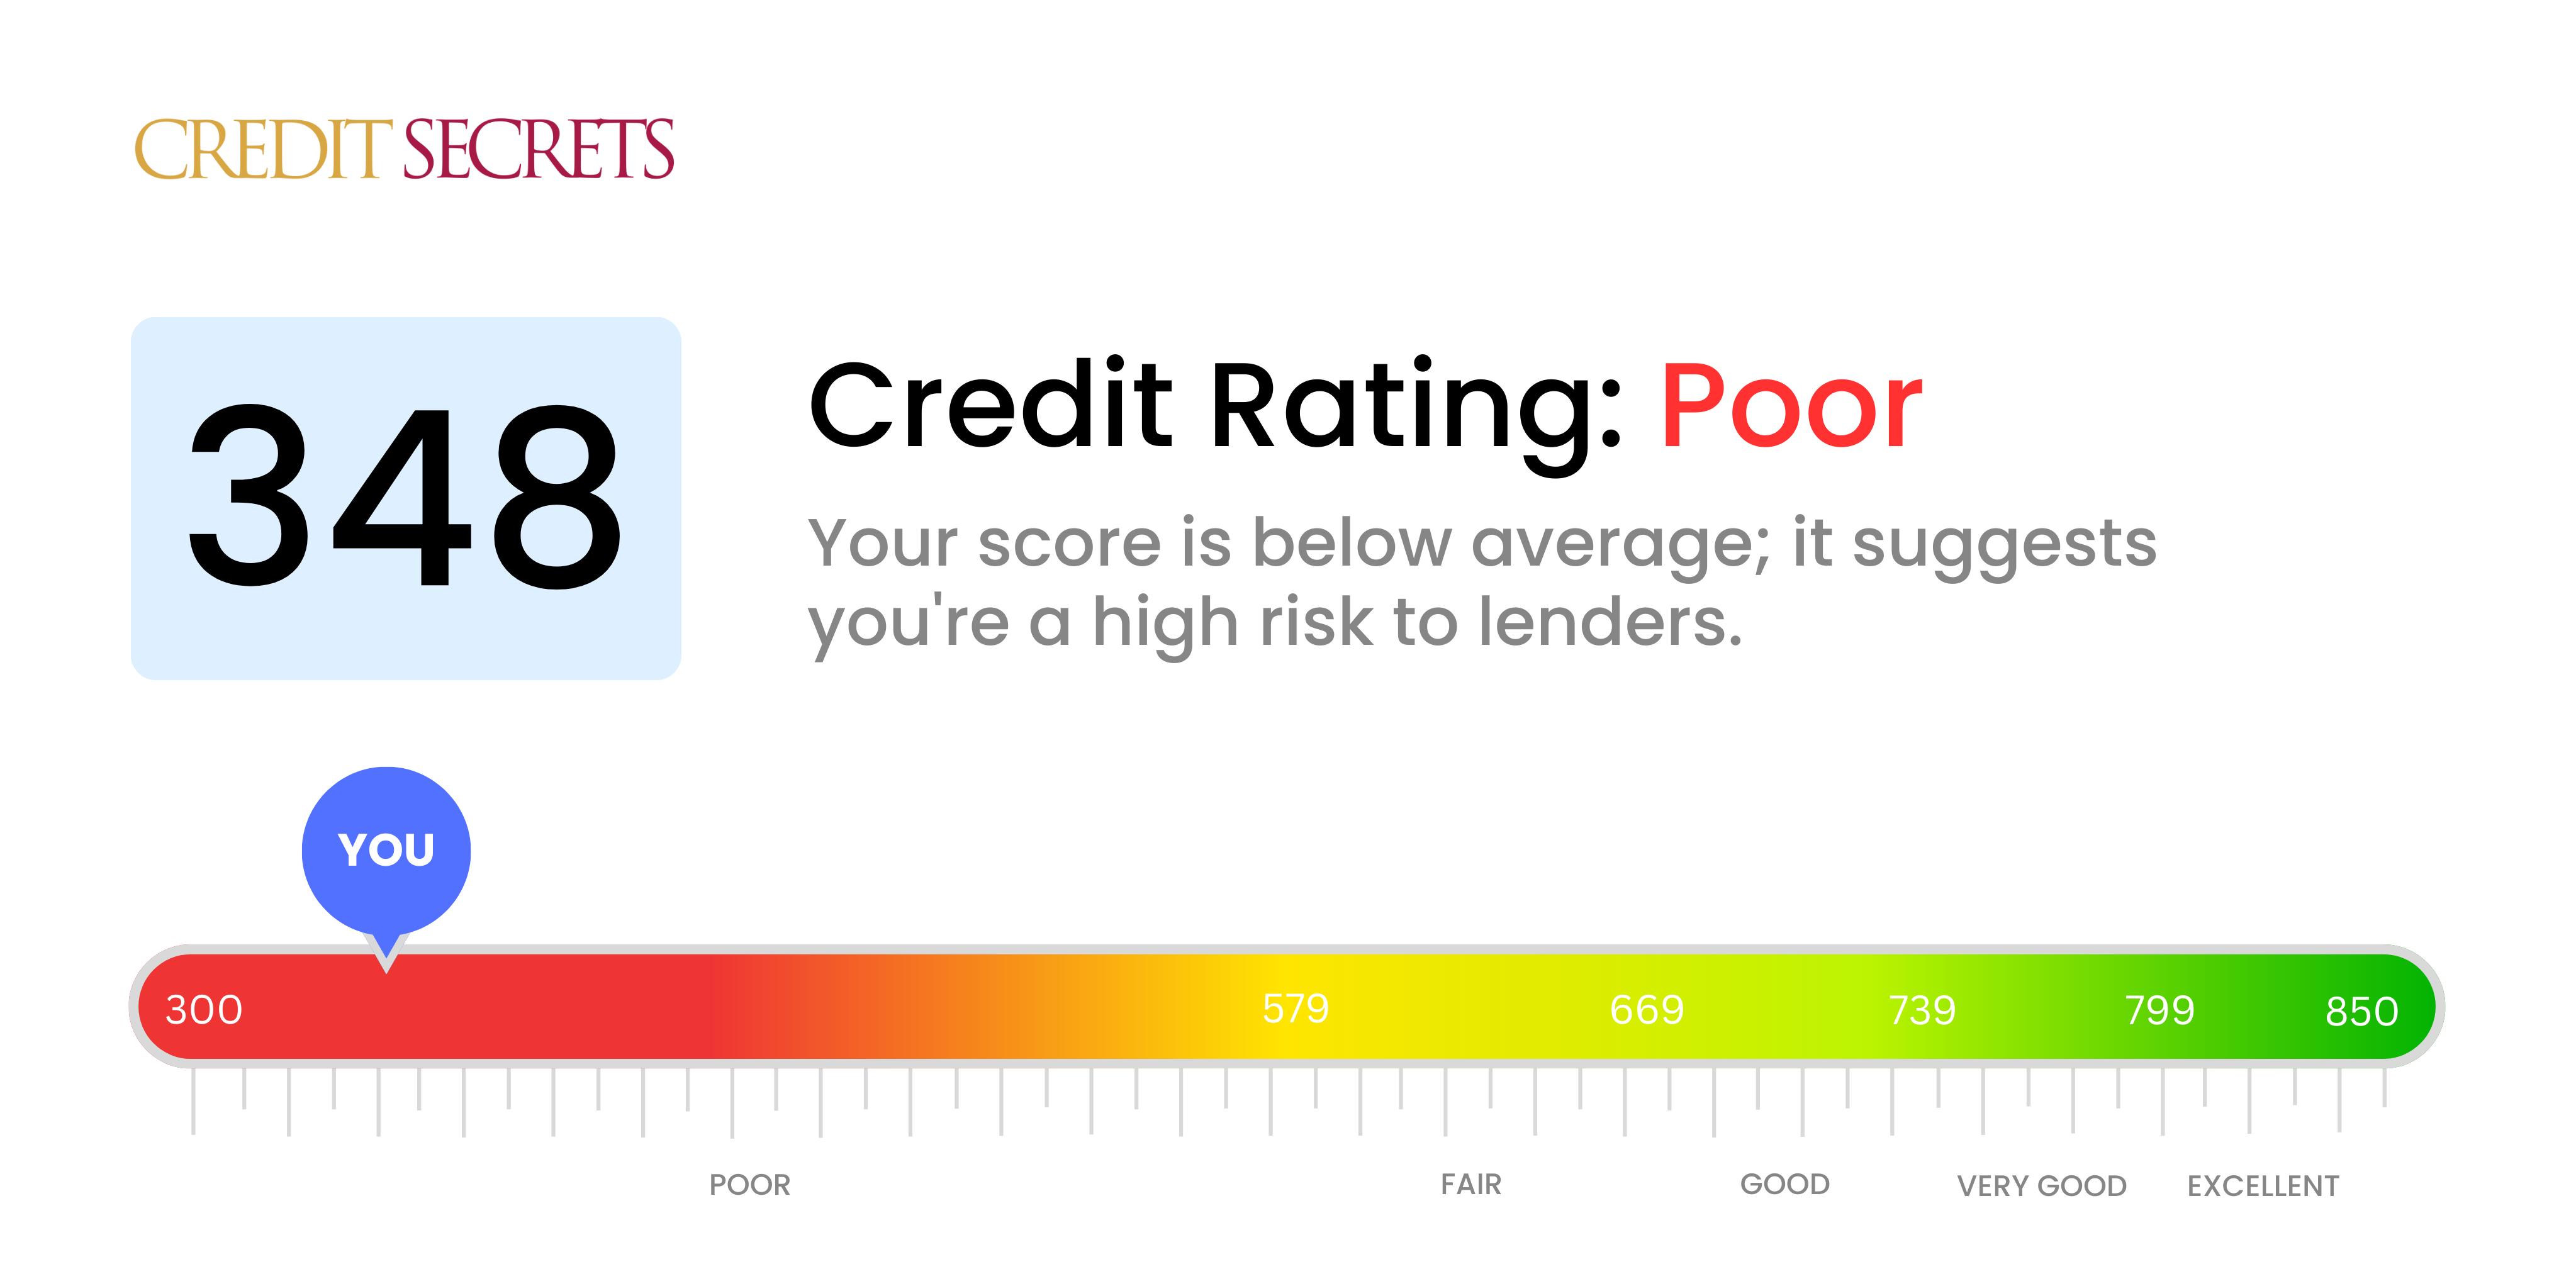 Is 348 a good credit score?